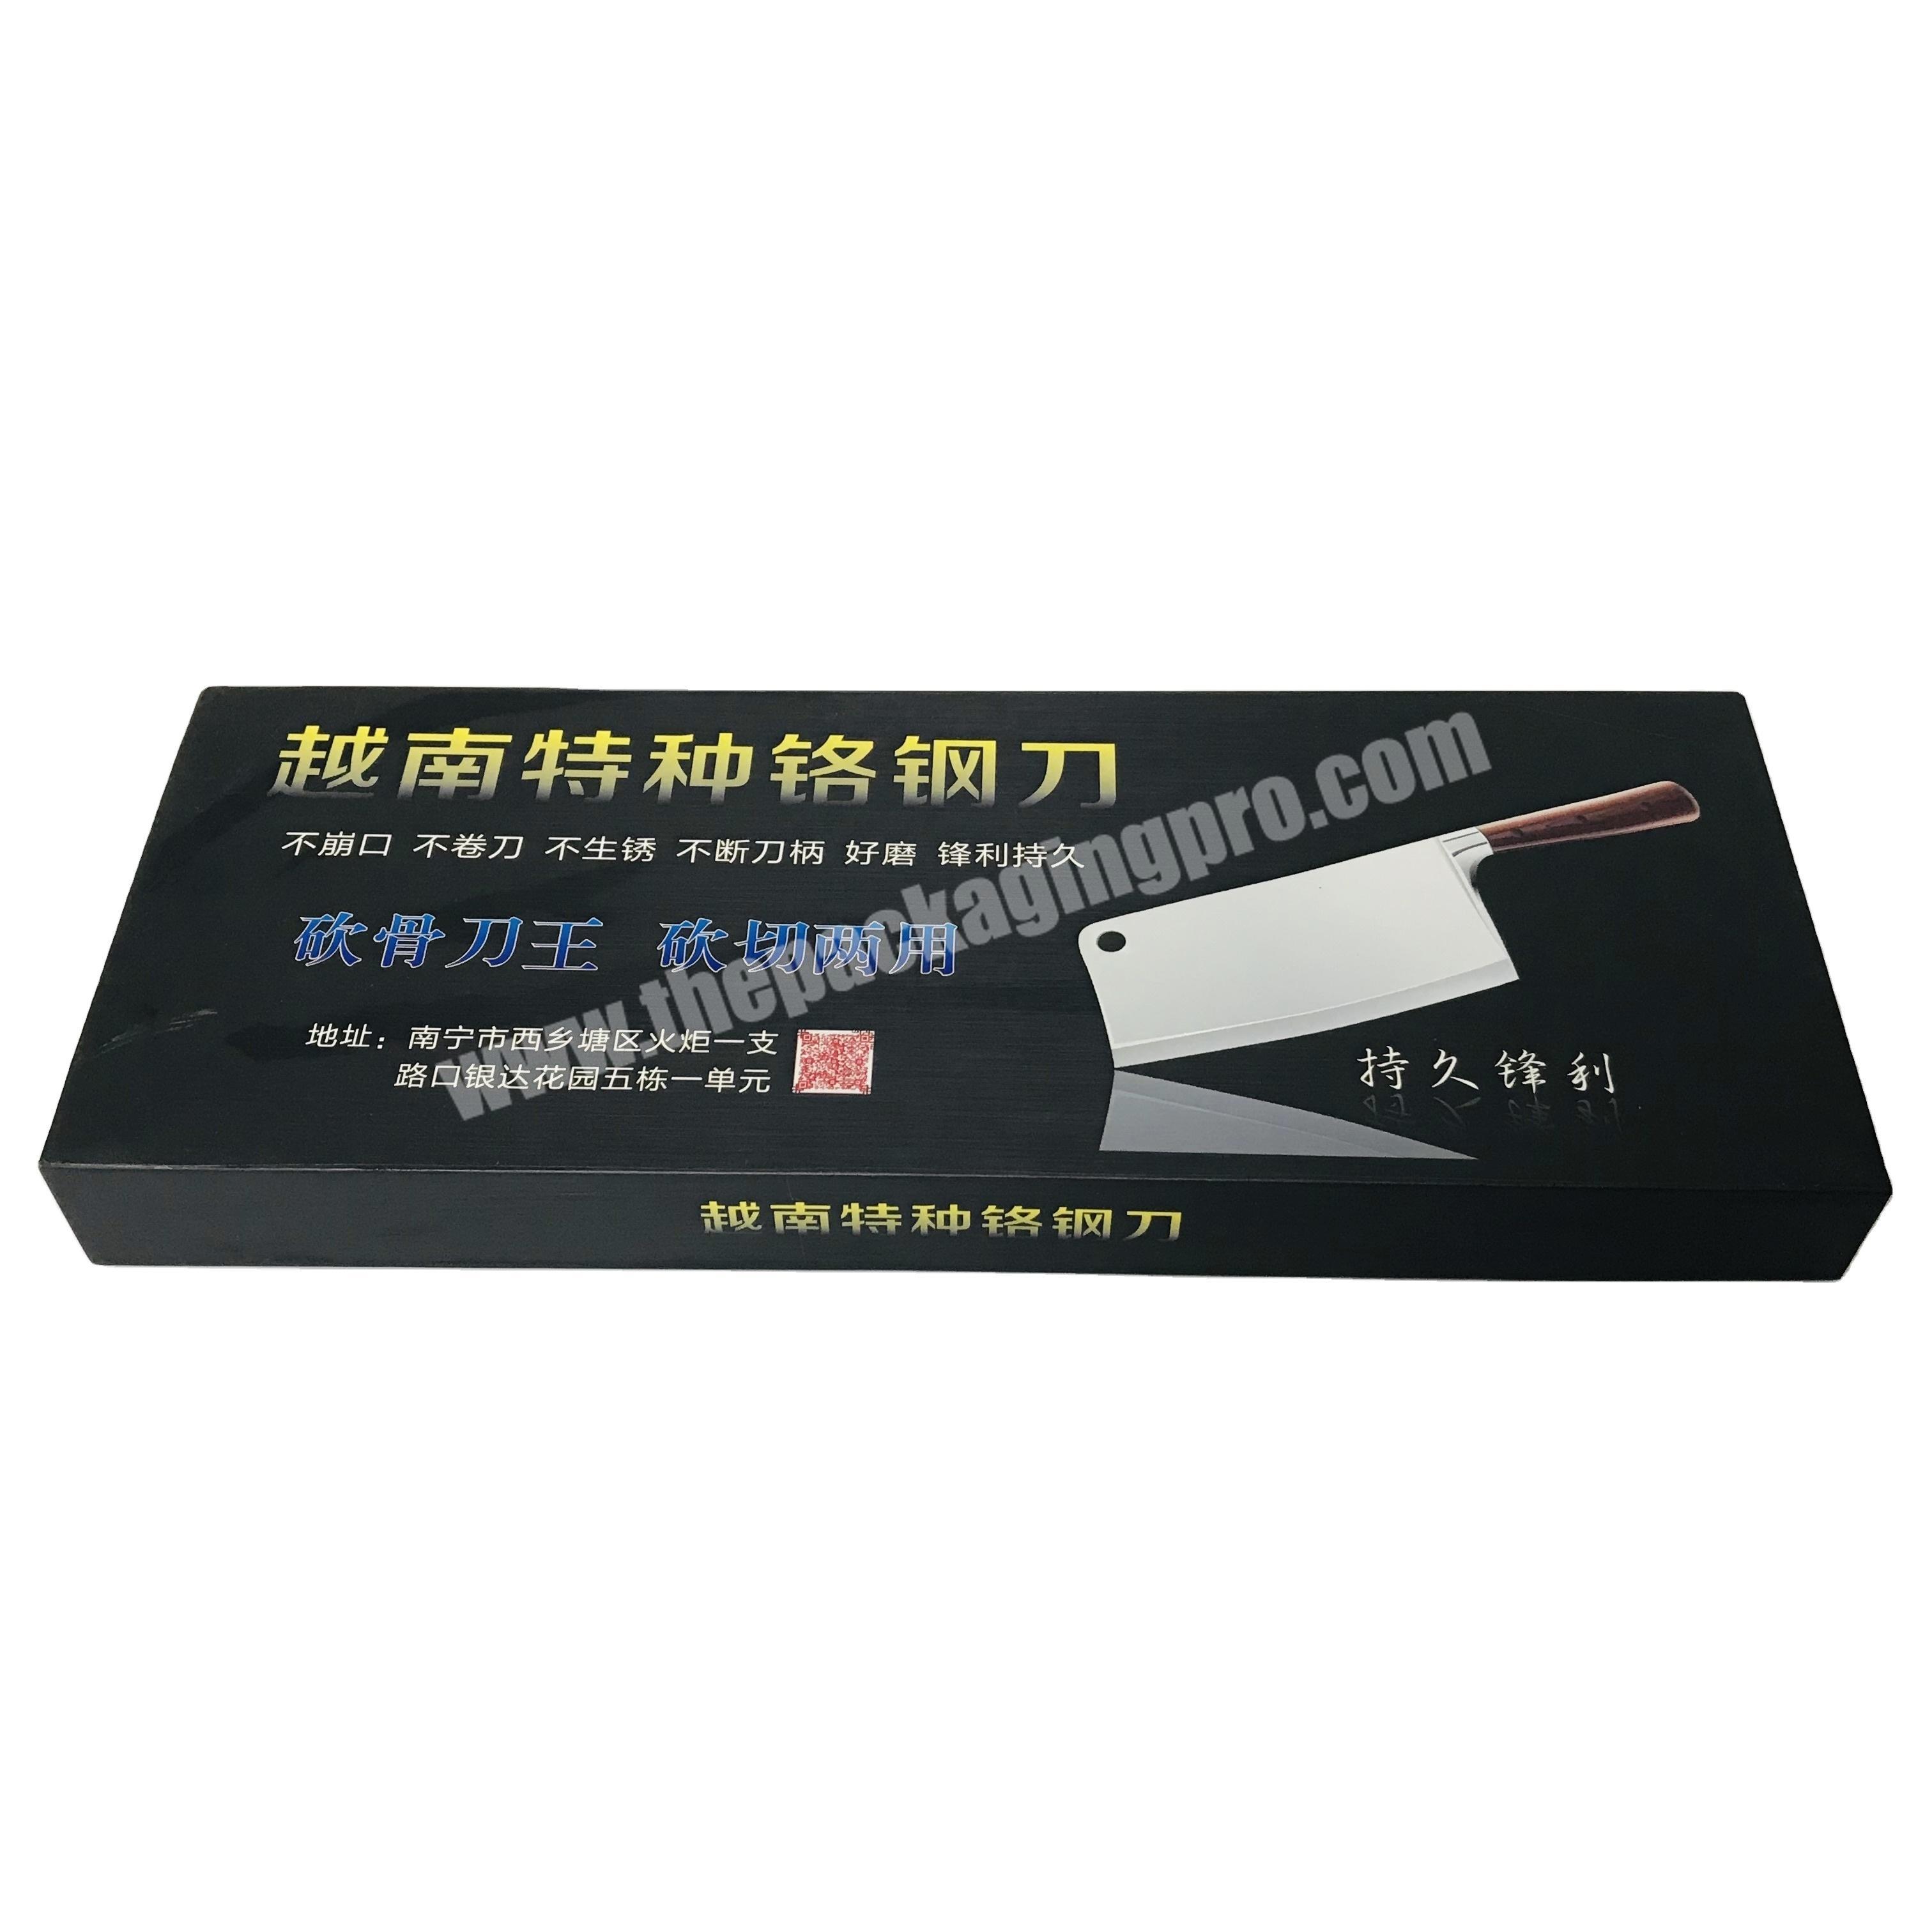 Luxury paper Black rigid magnet fold a gift packaging box with magnetic closure lid for kitchen knife